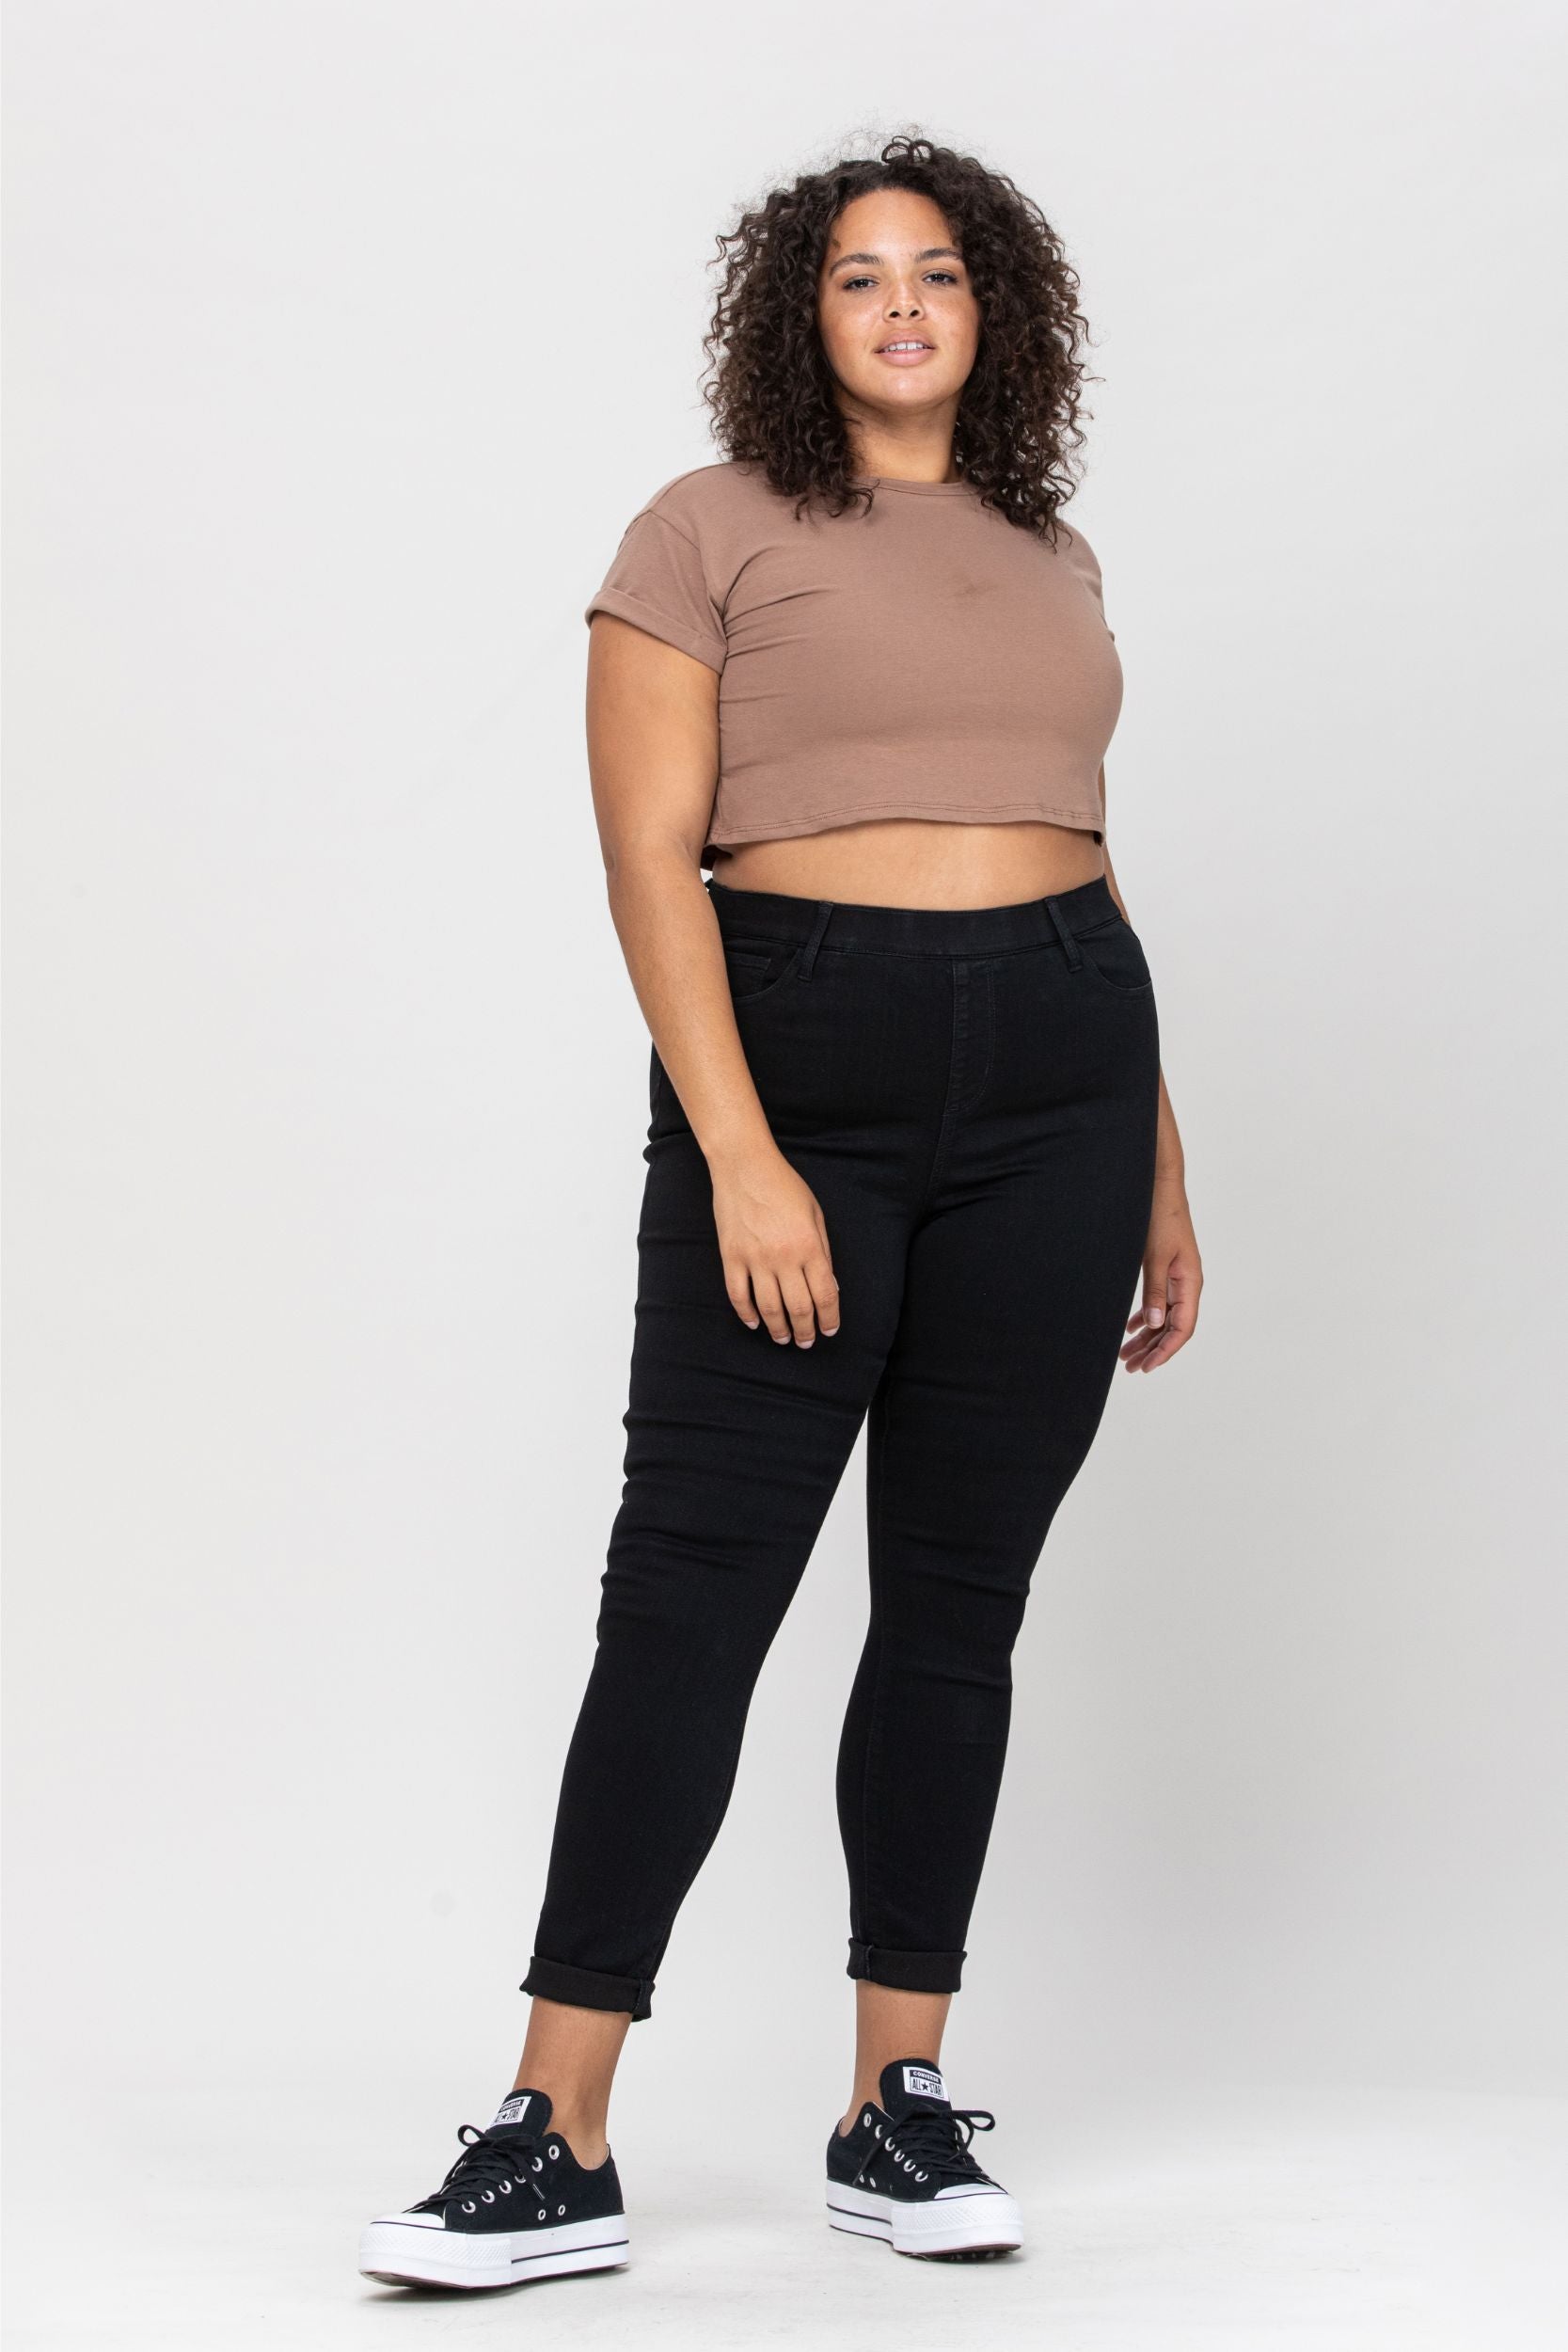 cello jeans mid rise pull on crop skinny plus size dark wash AB76535BLKP